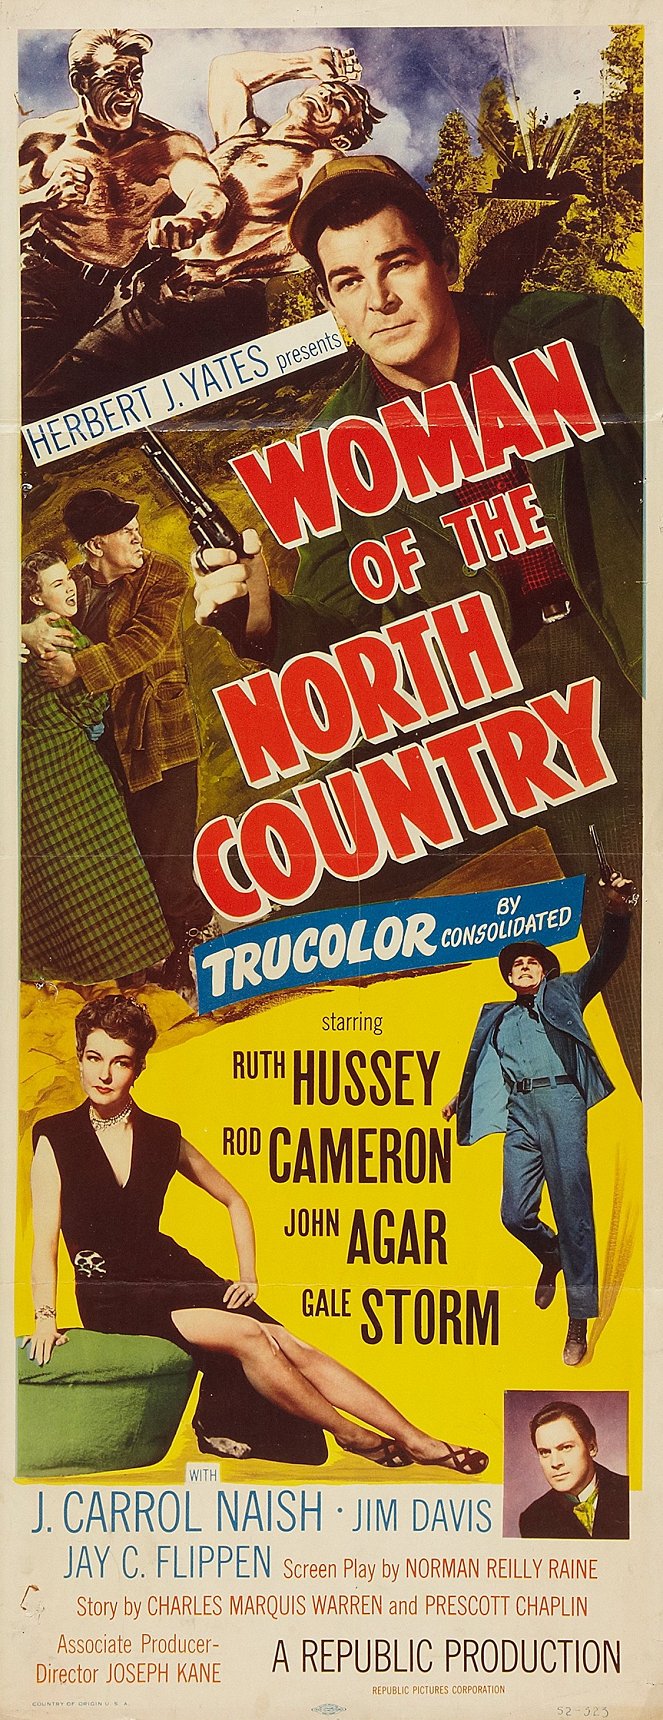 Woman of the North Country - Plakaty